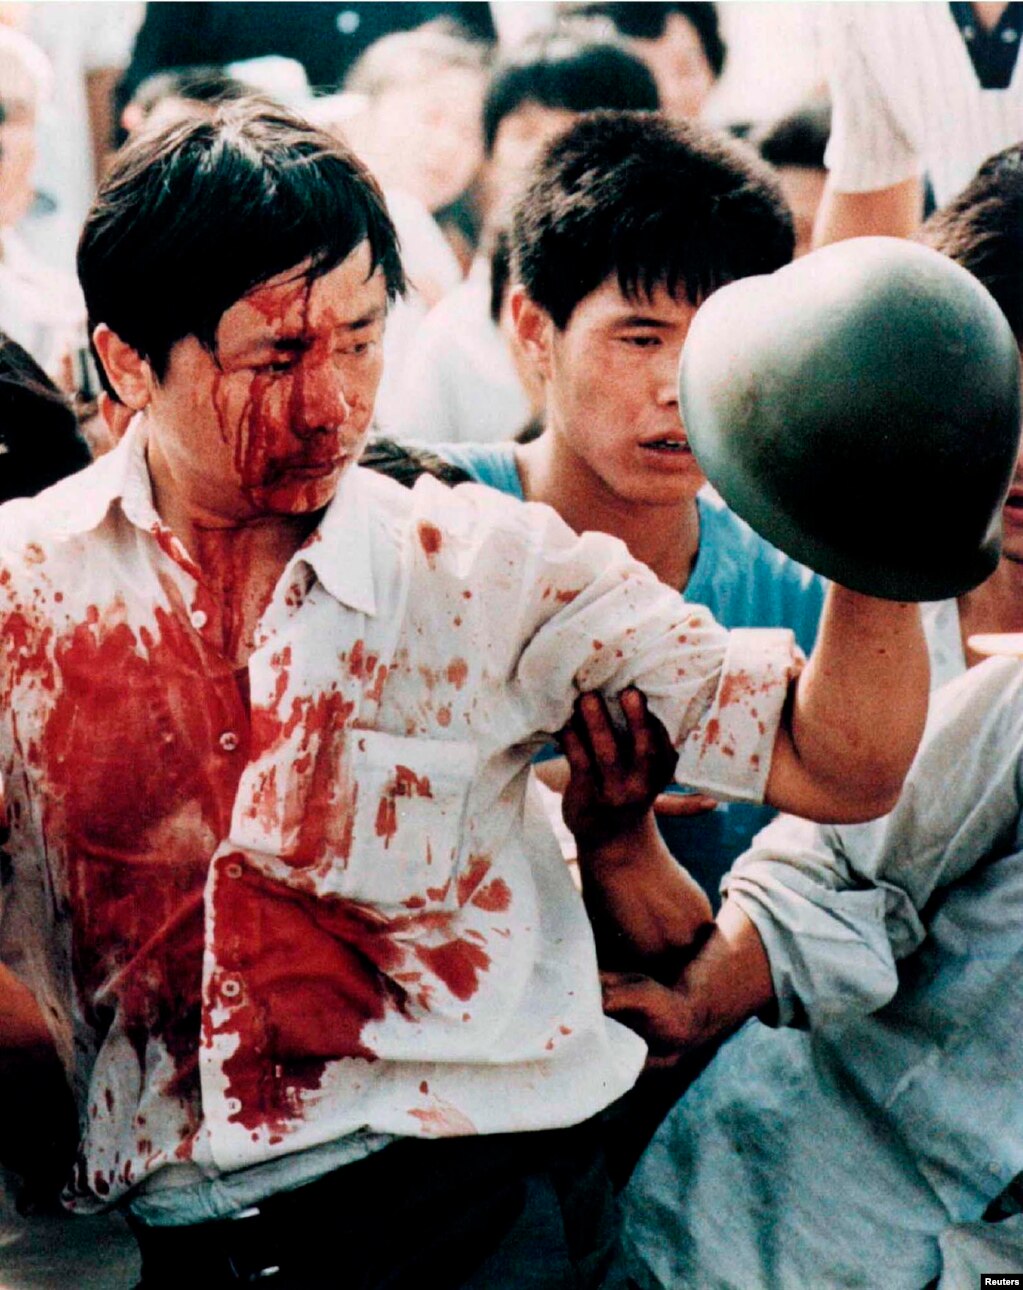 Countering the lies about the Tiananmen Square massacre